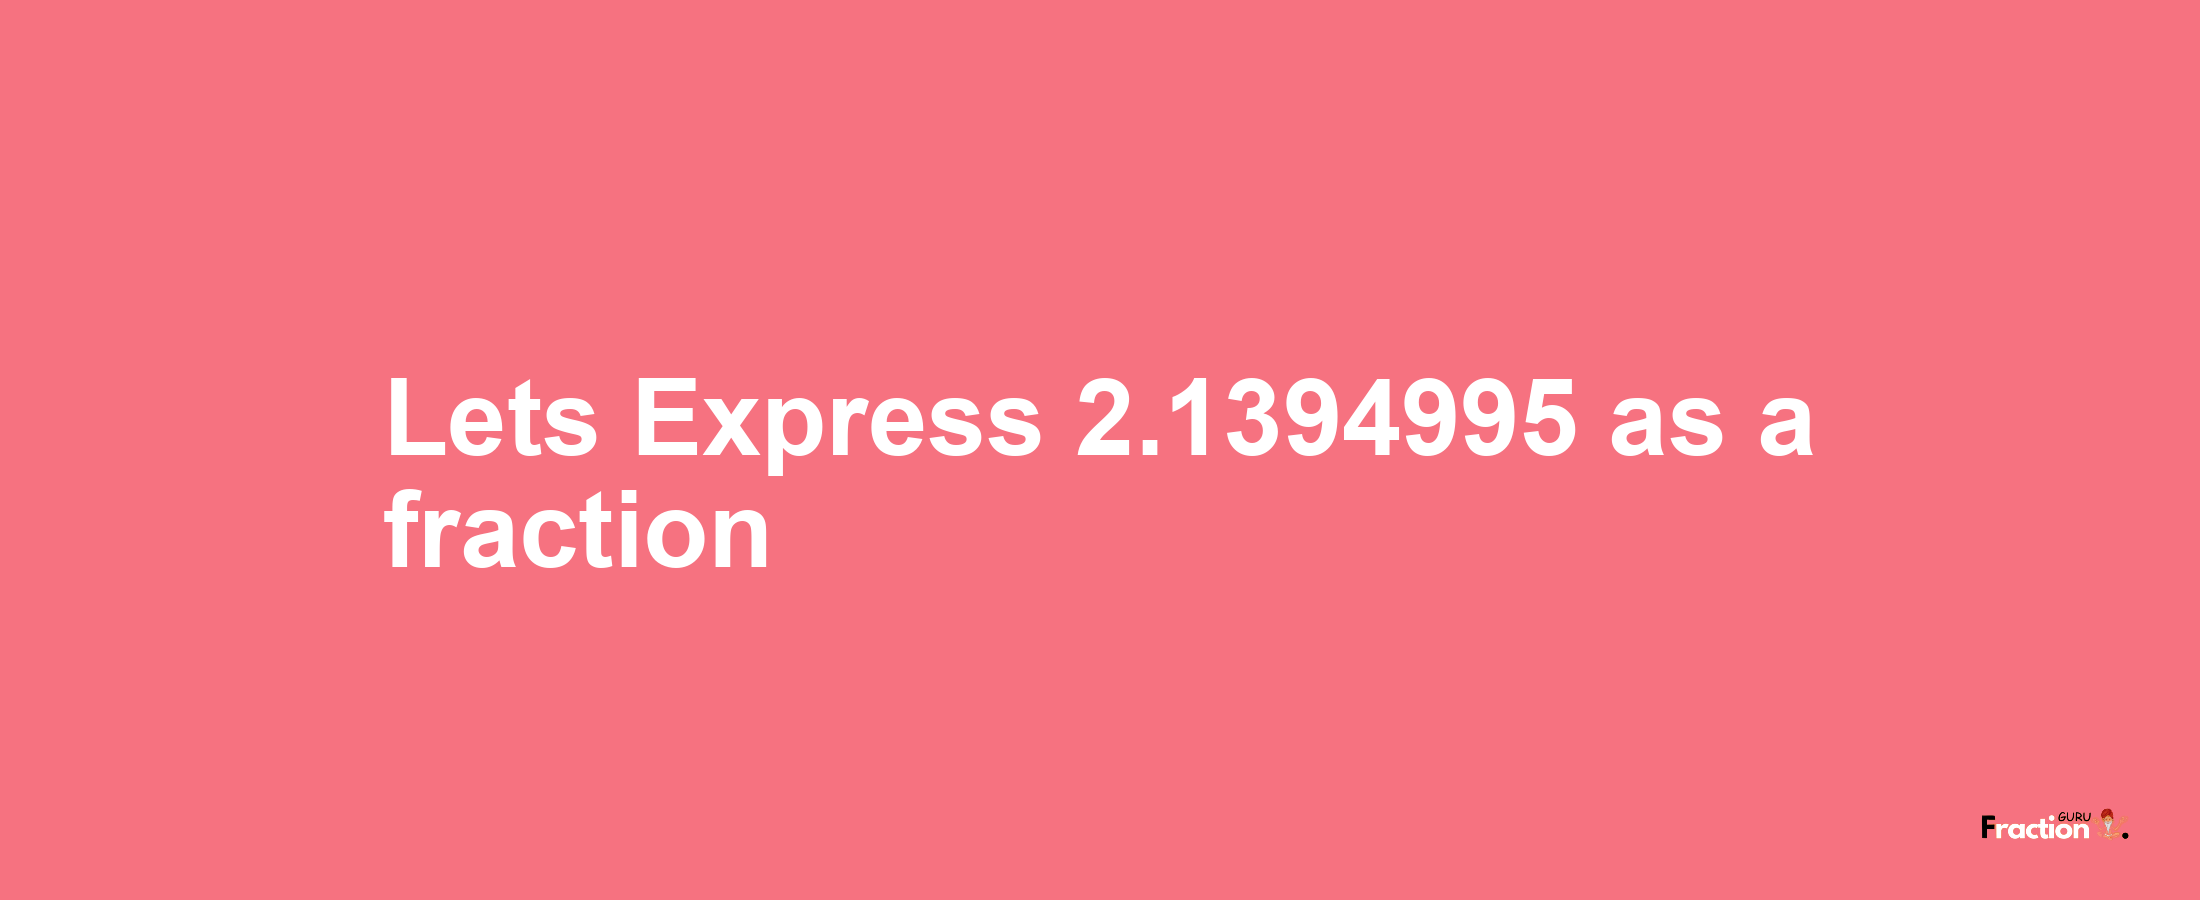 Lets Express 2.1394995 as afraction